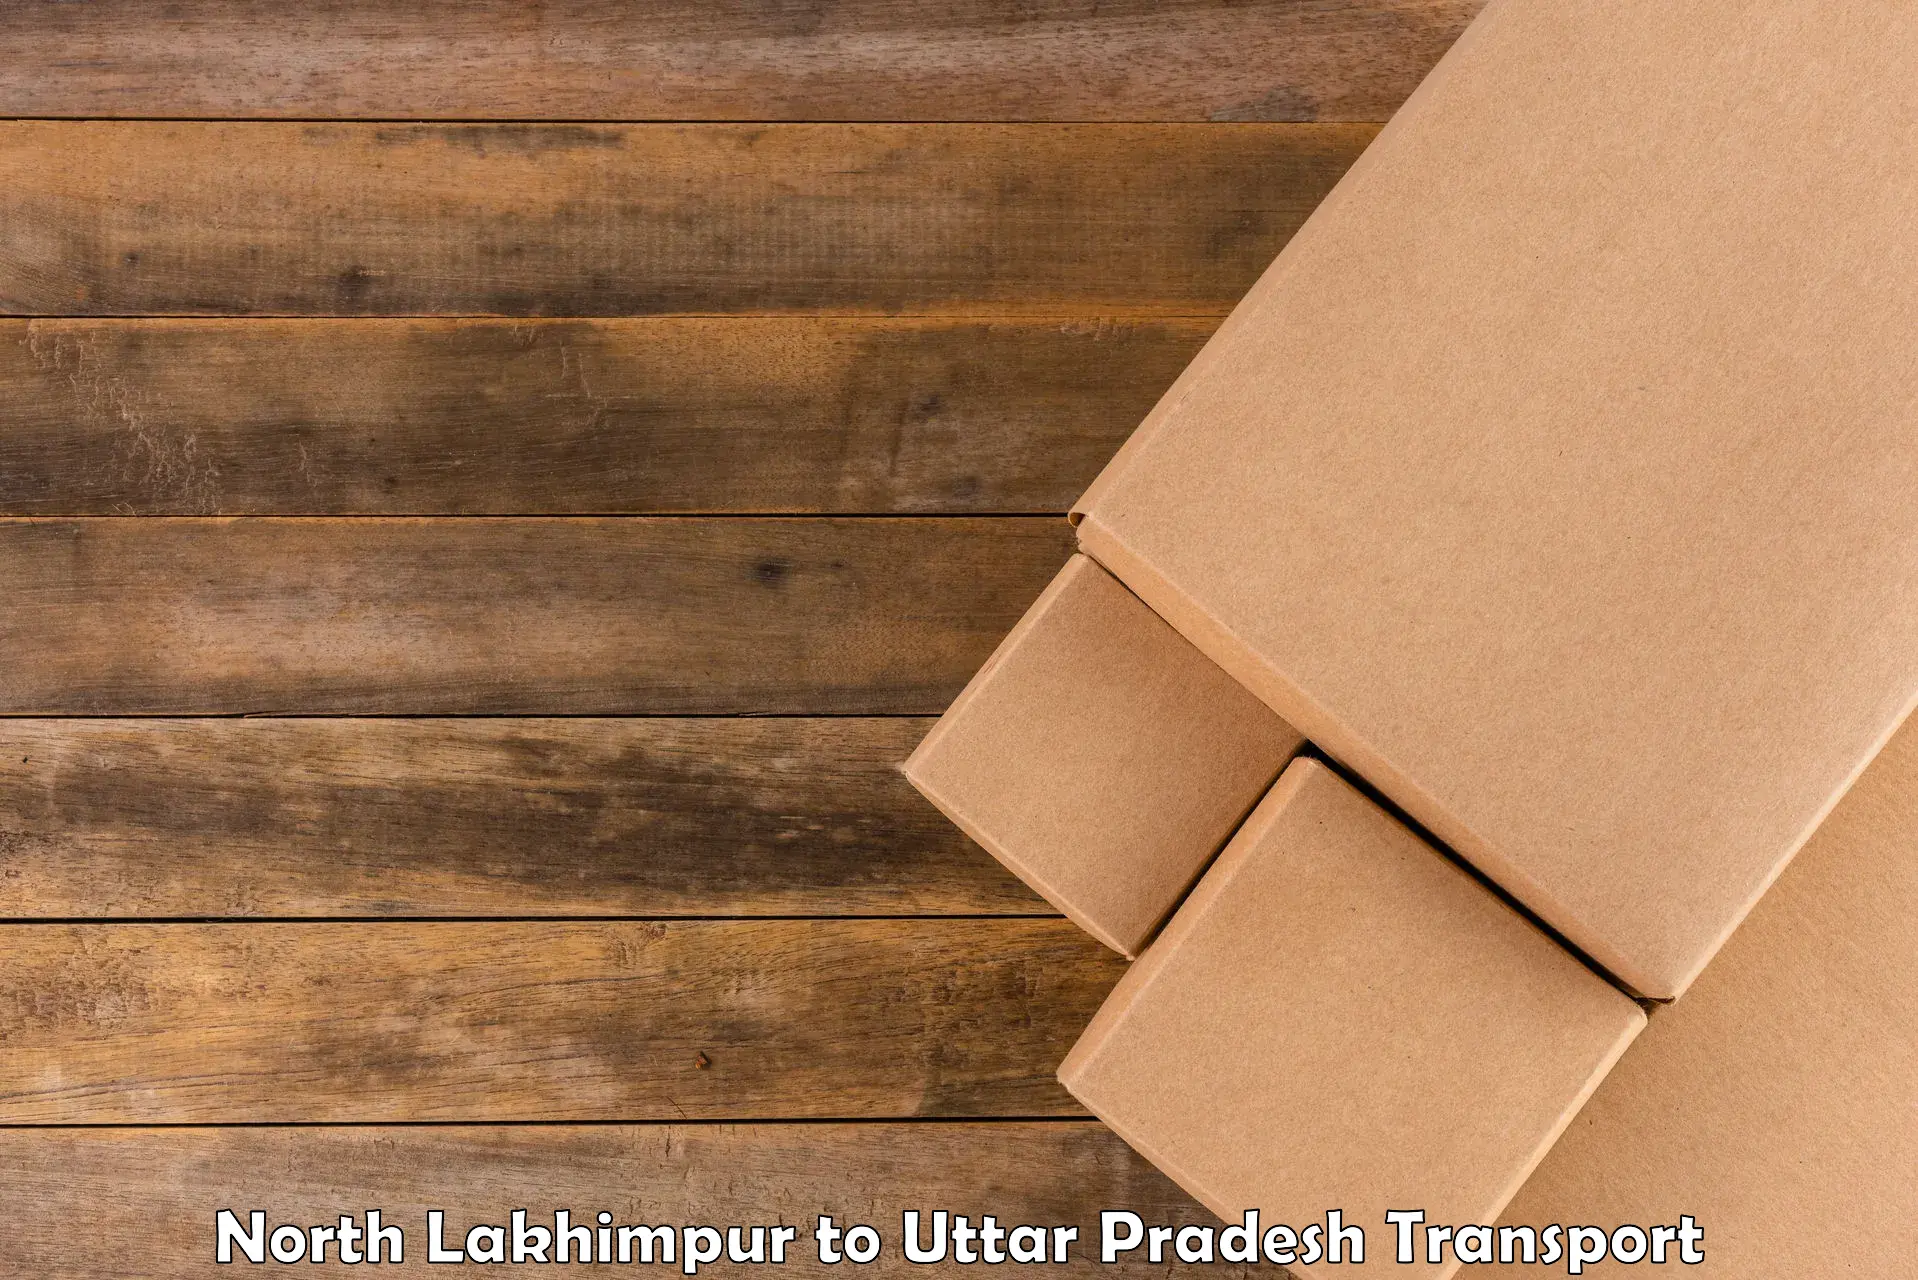 Truck transport companies in India North Lakhimpur to Aligarh